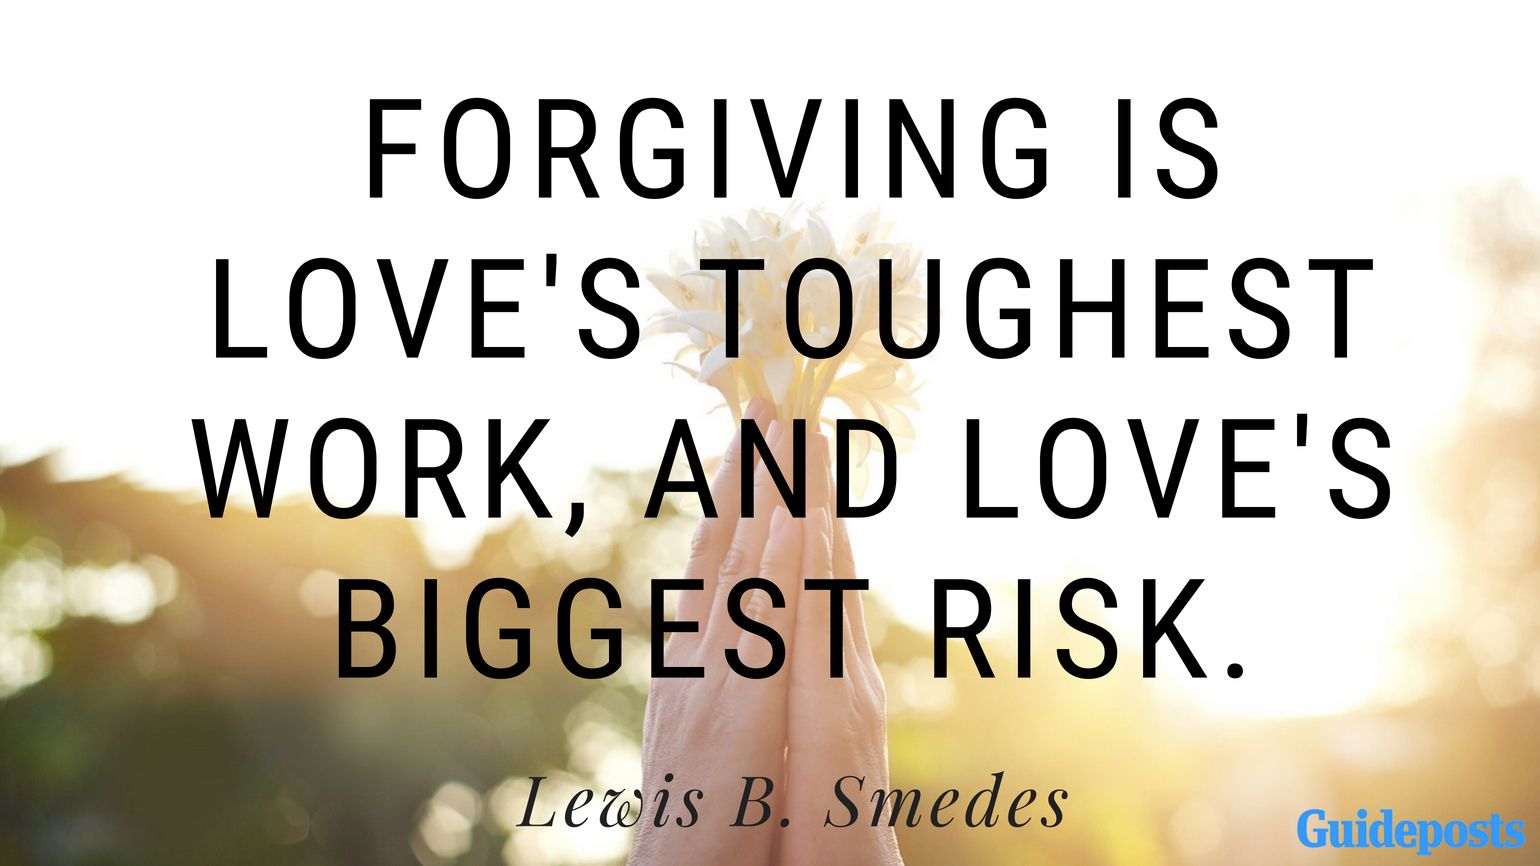 Forgiving is love's toughest work, and love's biggest risk. ― Lewis B. Smedes